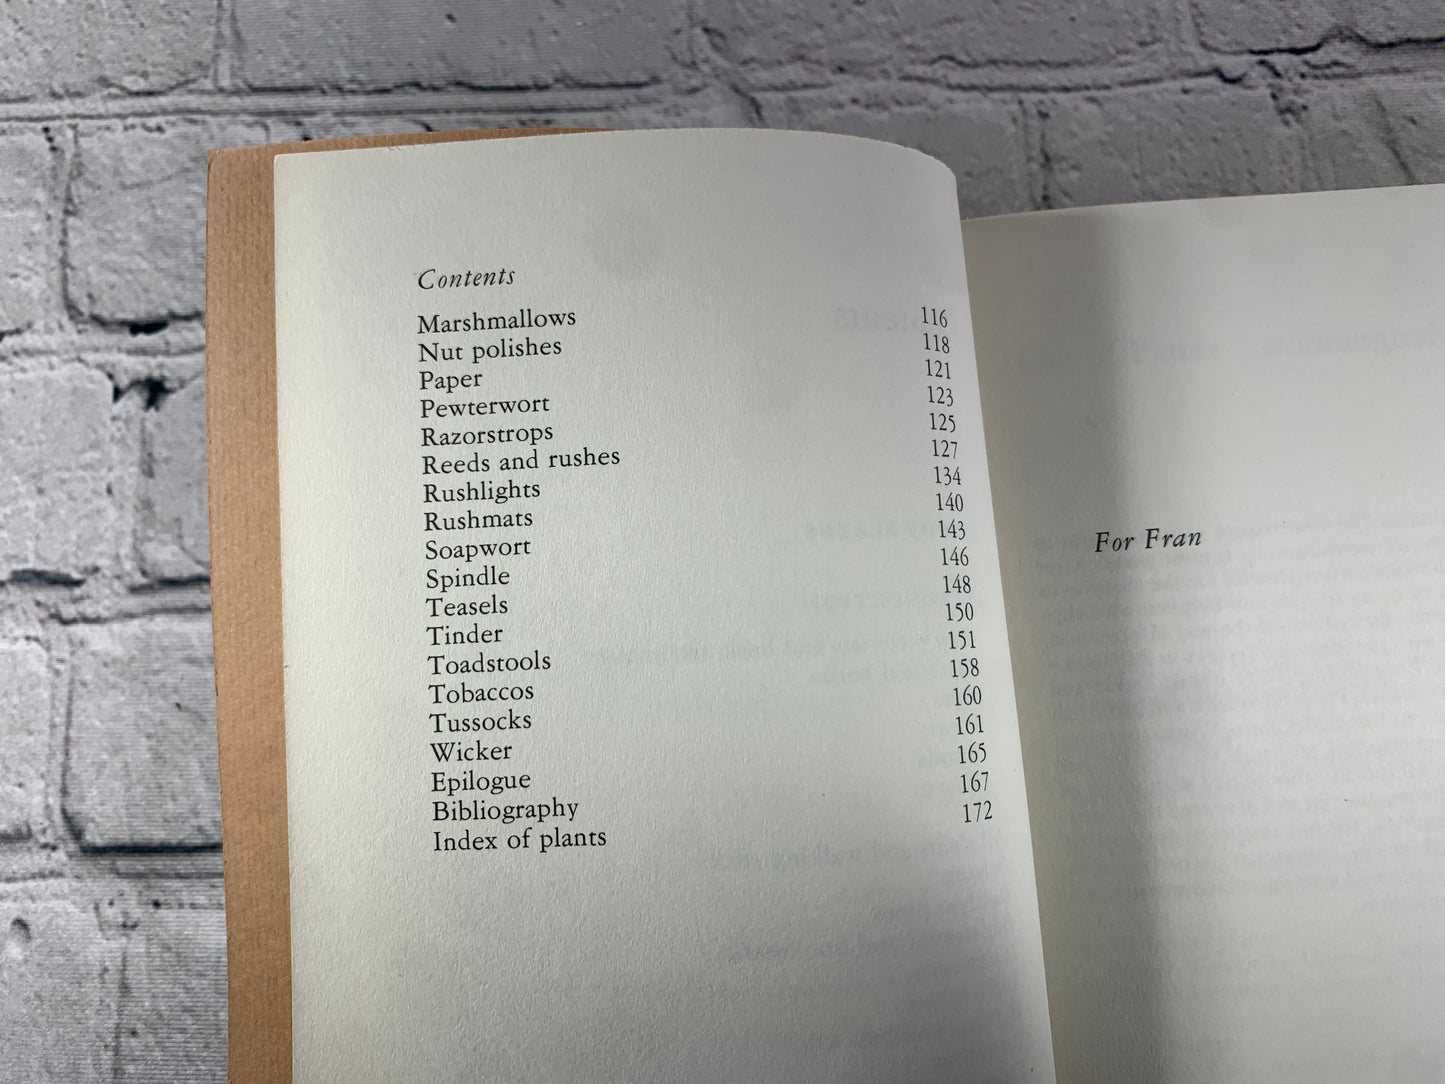 Plantcraft: A Guide to Everyday Use of WIld Plants by Richard Mabey [1977]